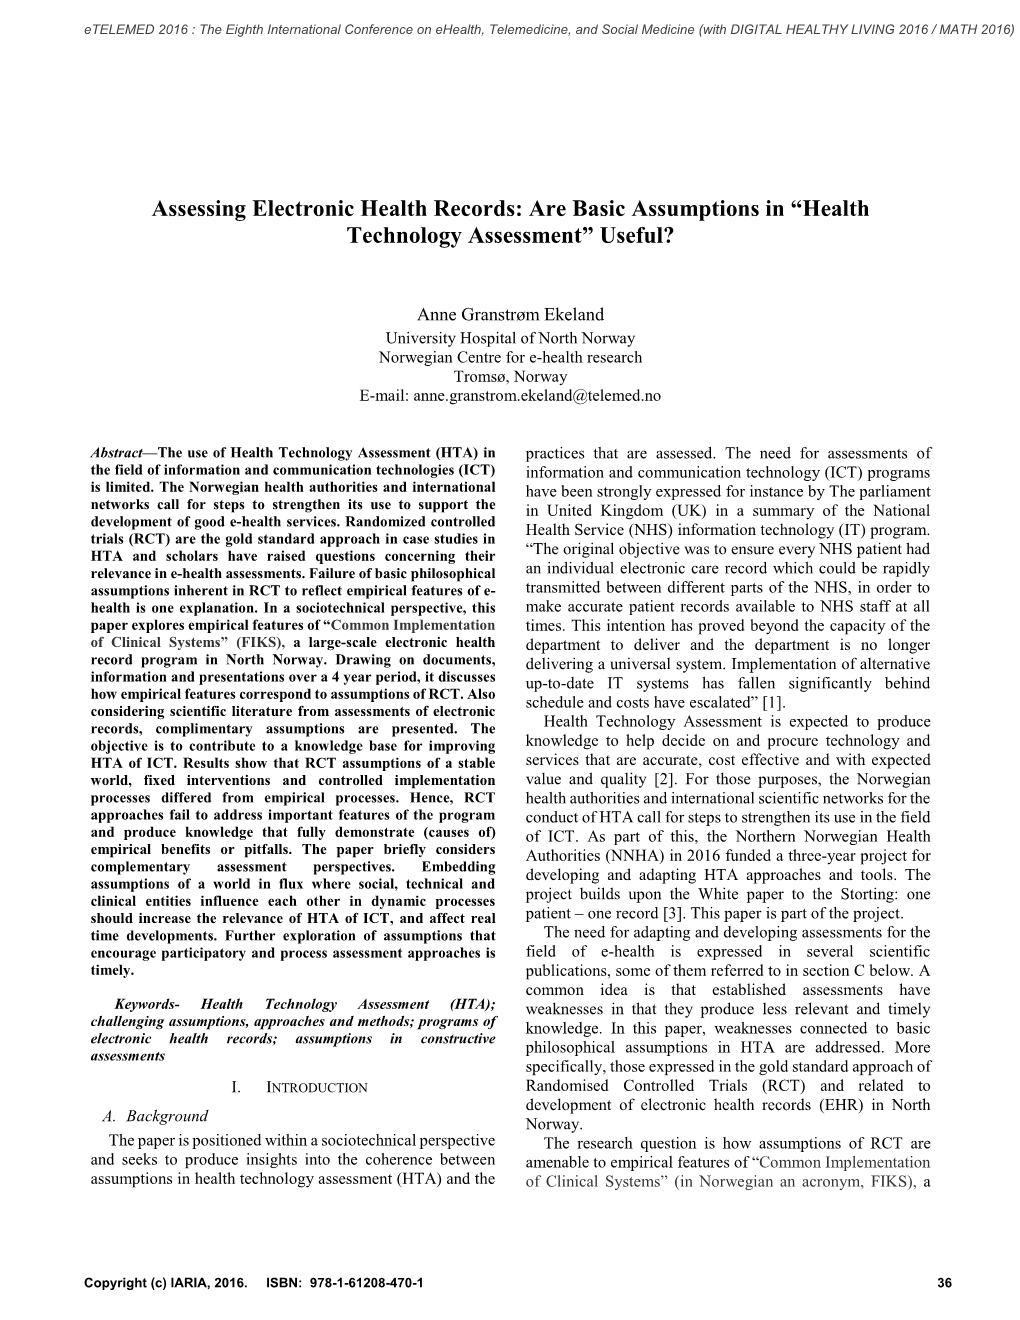 Assessing Electronic Health Records: Are Basic Assumptions in “Health Technology Assessment” Useful?